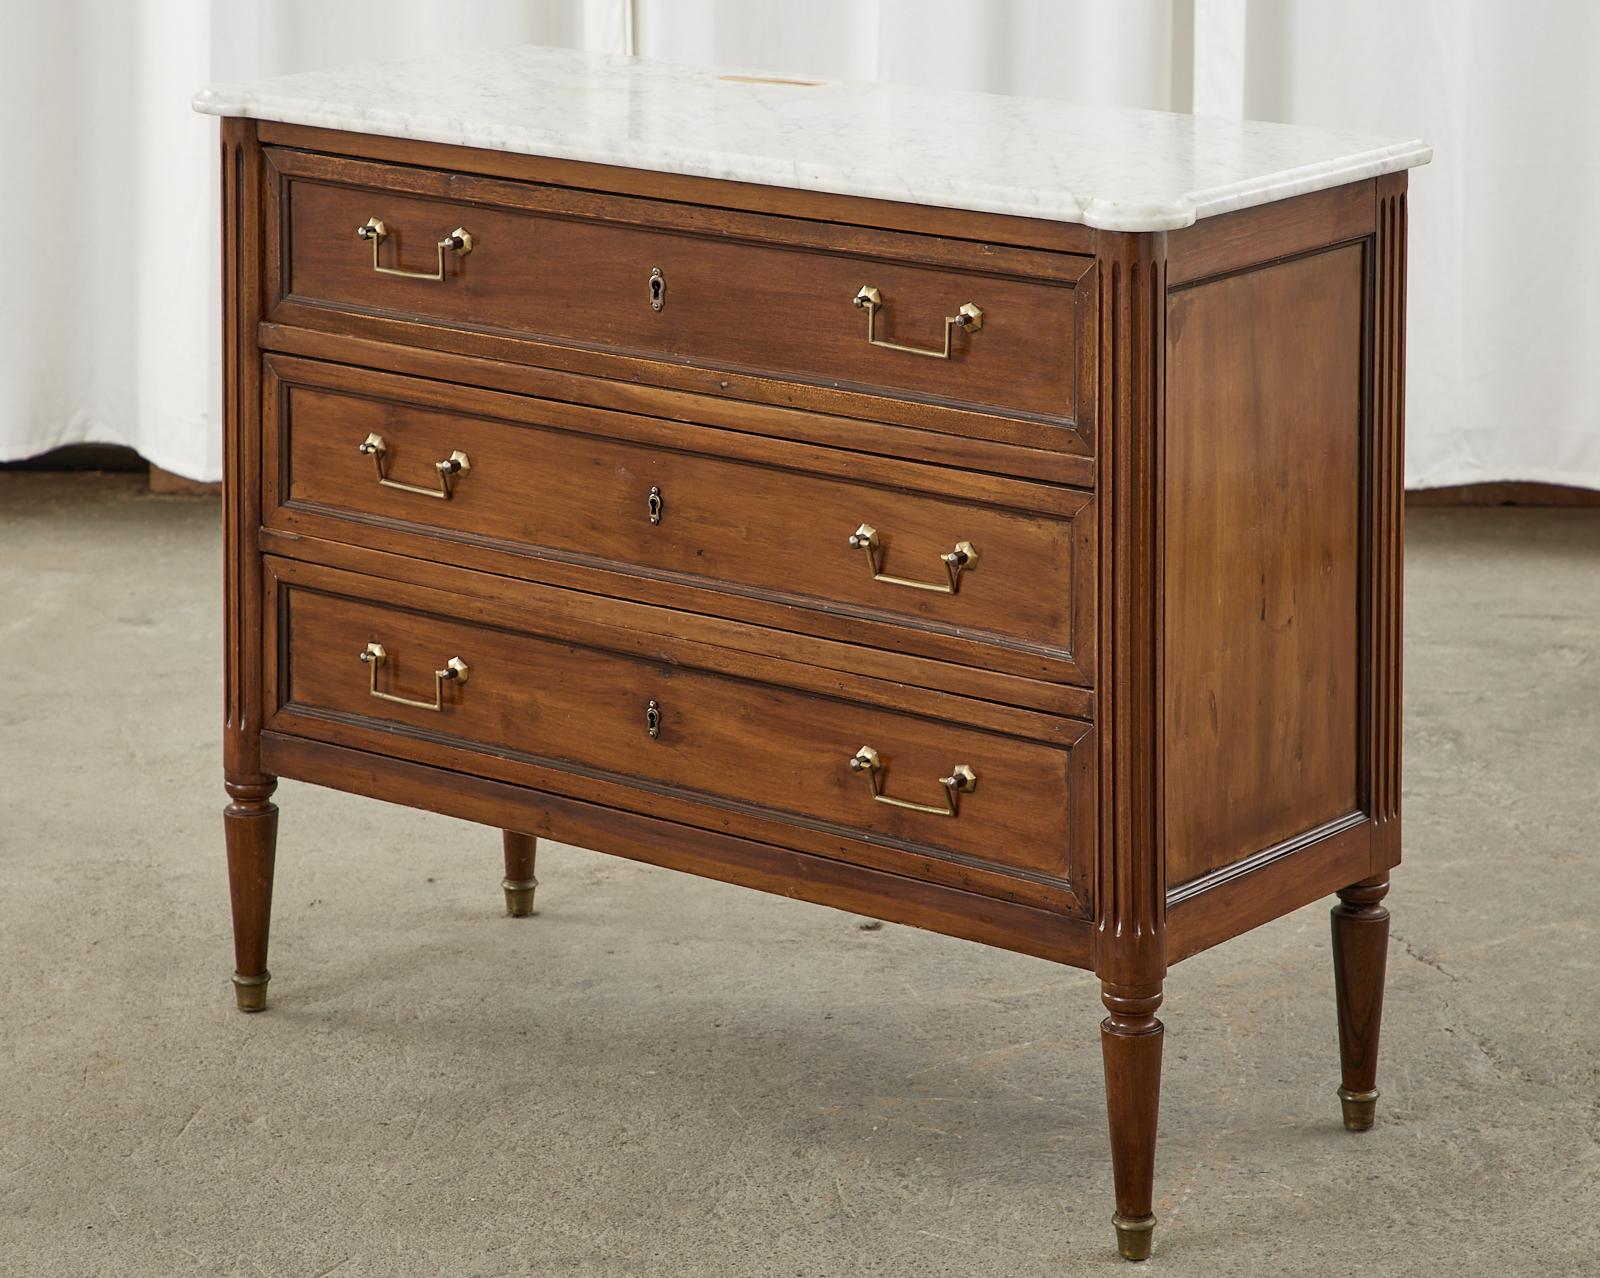 Hand-Crafted French Louis XVI Style Mahogany Marble Top Commode Dresser